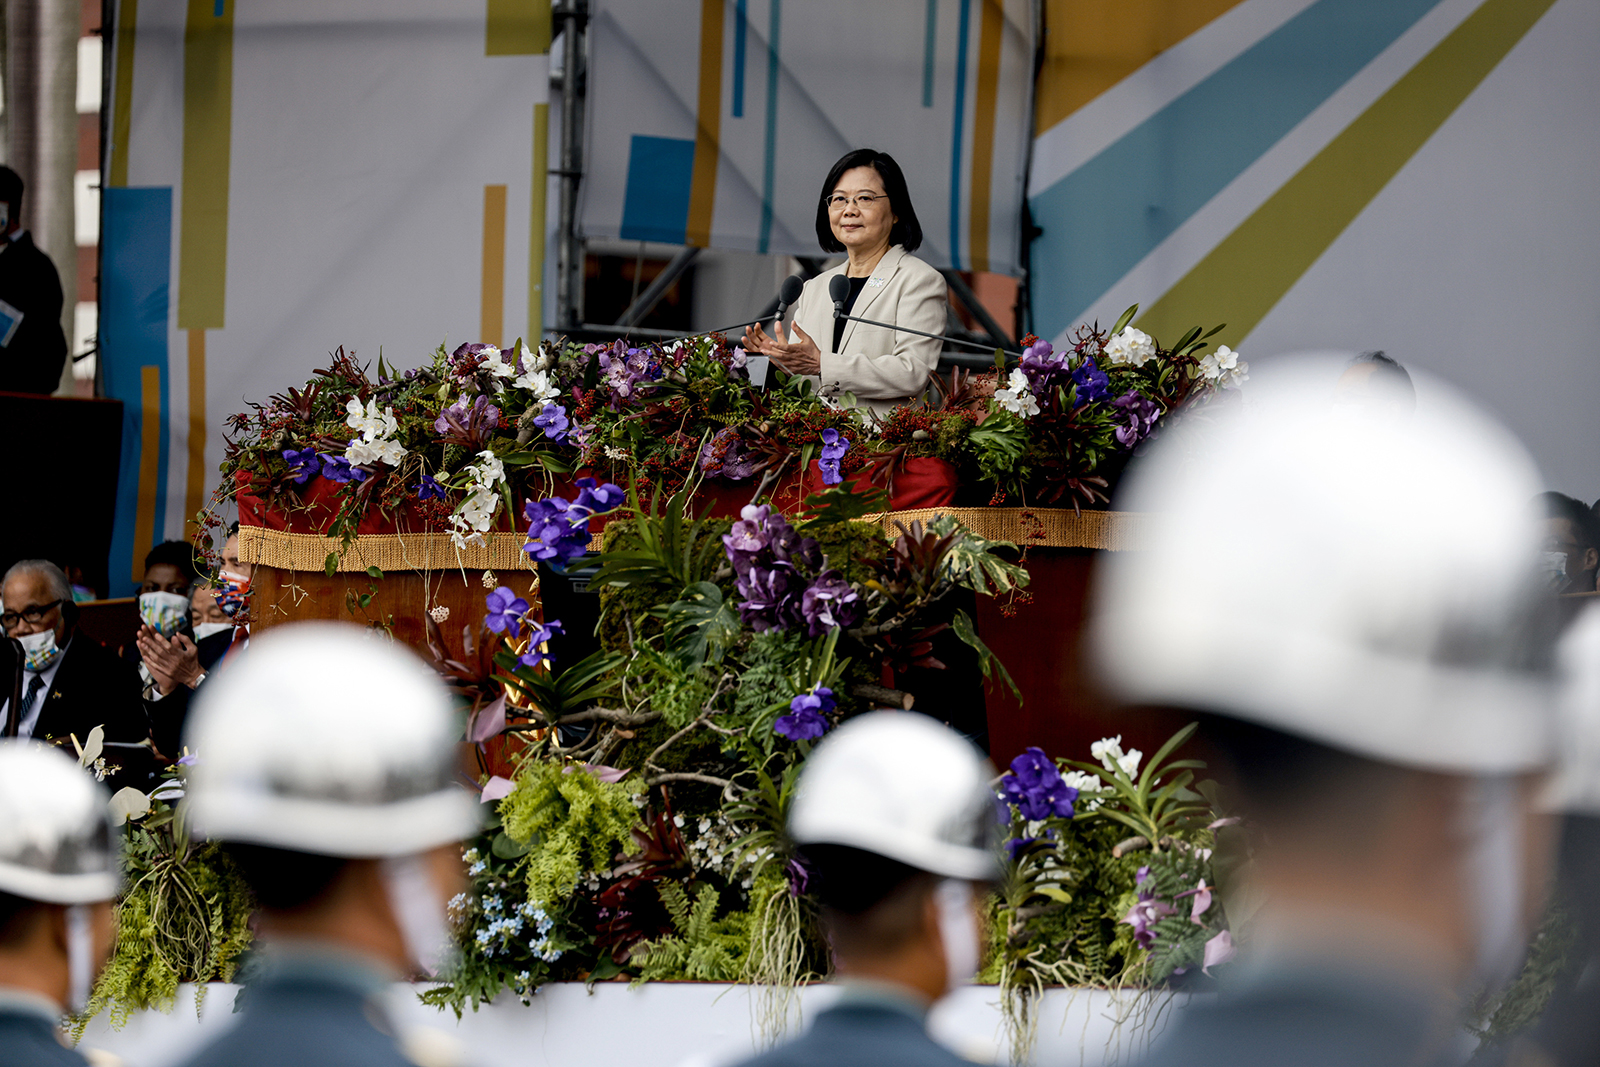 Taiwan's president, Tsai Ing-wen, speaks during the National Day celebration in Taipei on October 10.